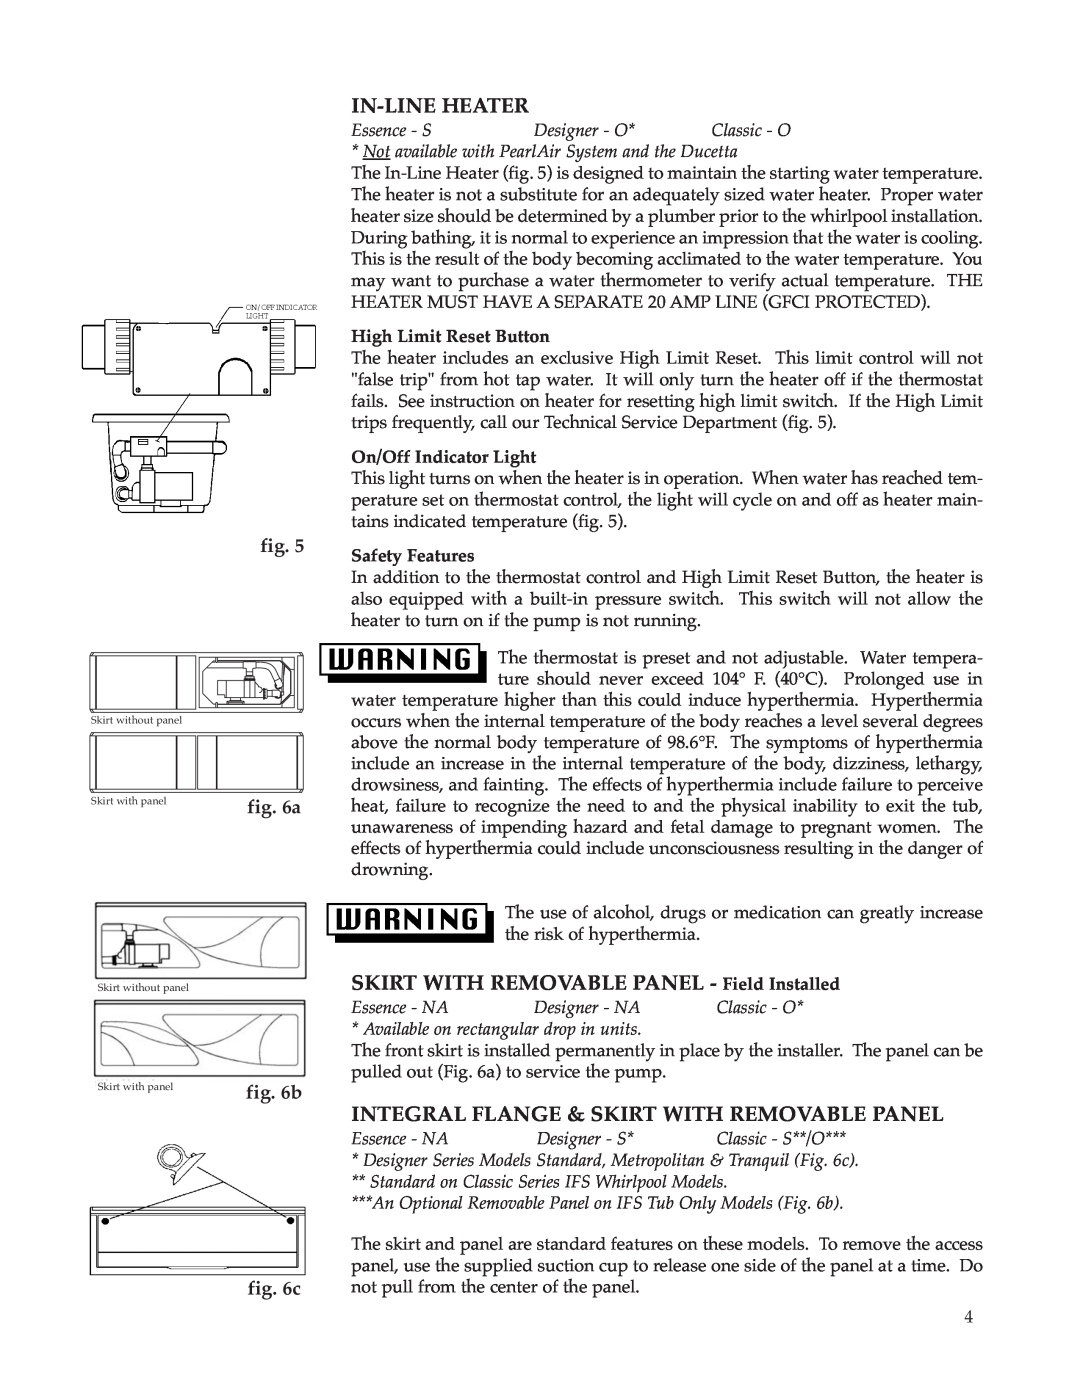 Whirlpool Hot Tub owner manual In-Line Heater, SKIRT WITH REMOVABLE PANEL - Field Installed, a b c, High Limit Reset Button 